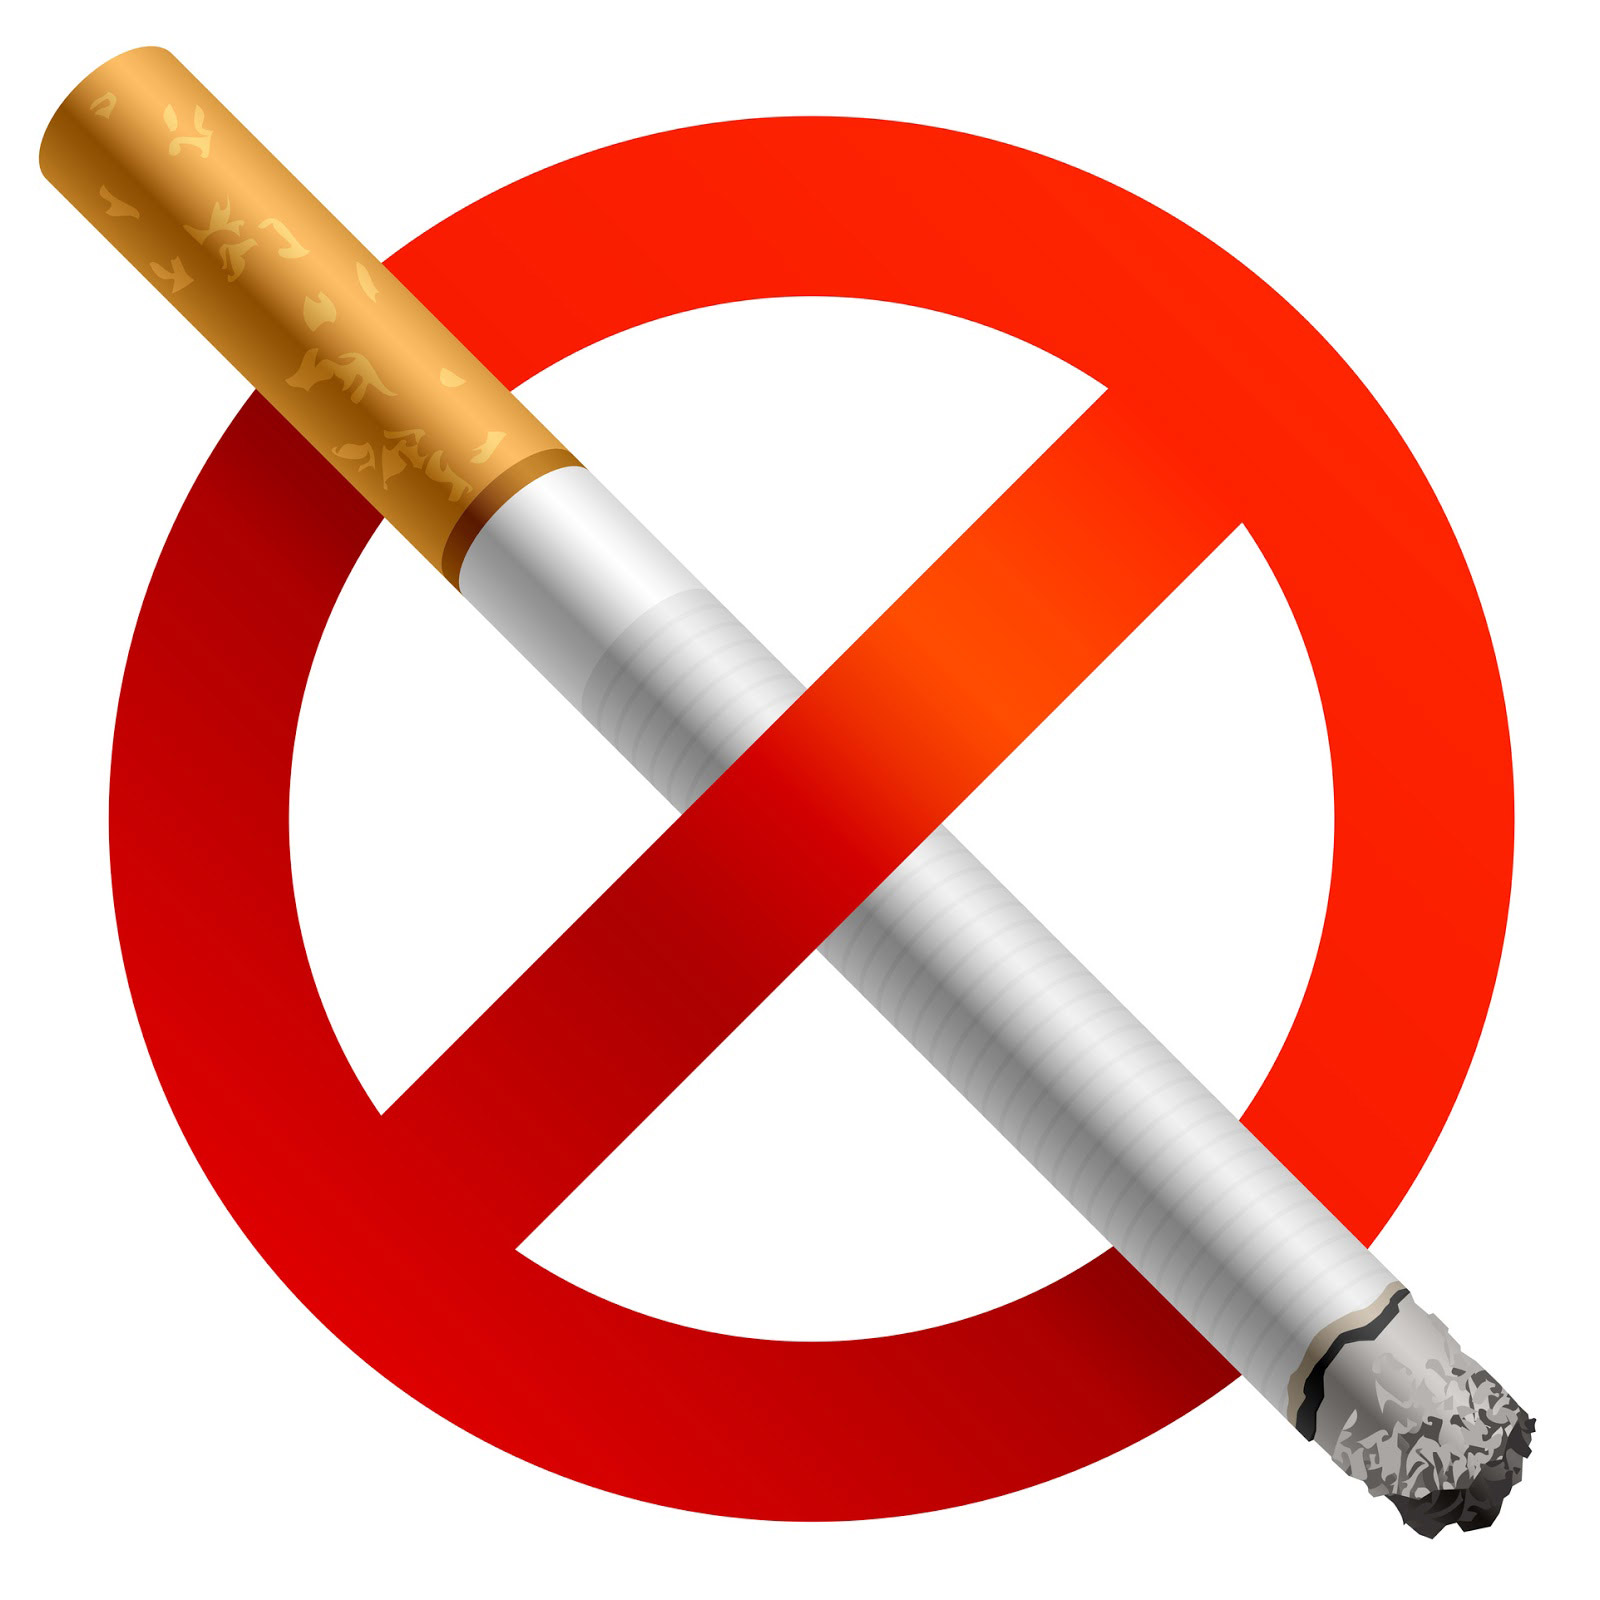 No Smoking Sign | Free Download Clip Art | Free Clip Art | on ...